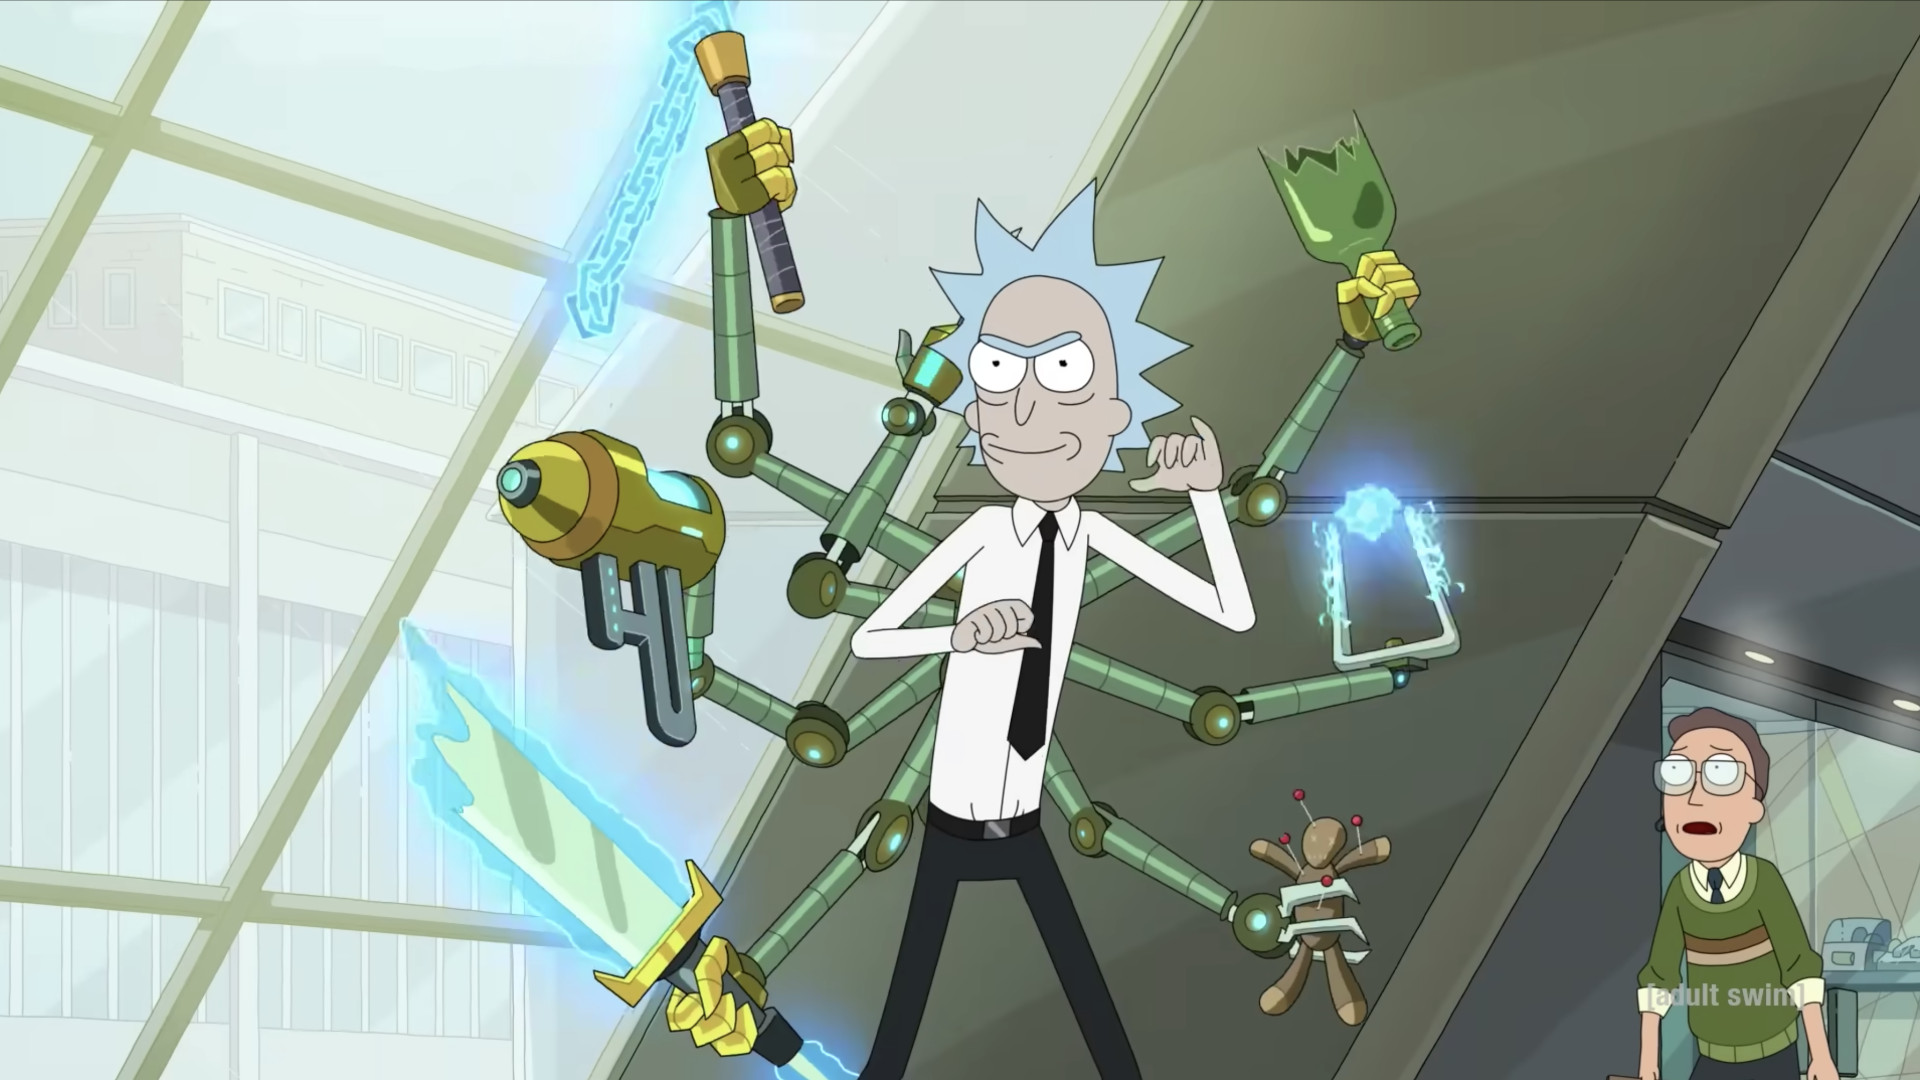 How to watch Rick and Morty season 6 online - stream new episodes